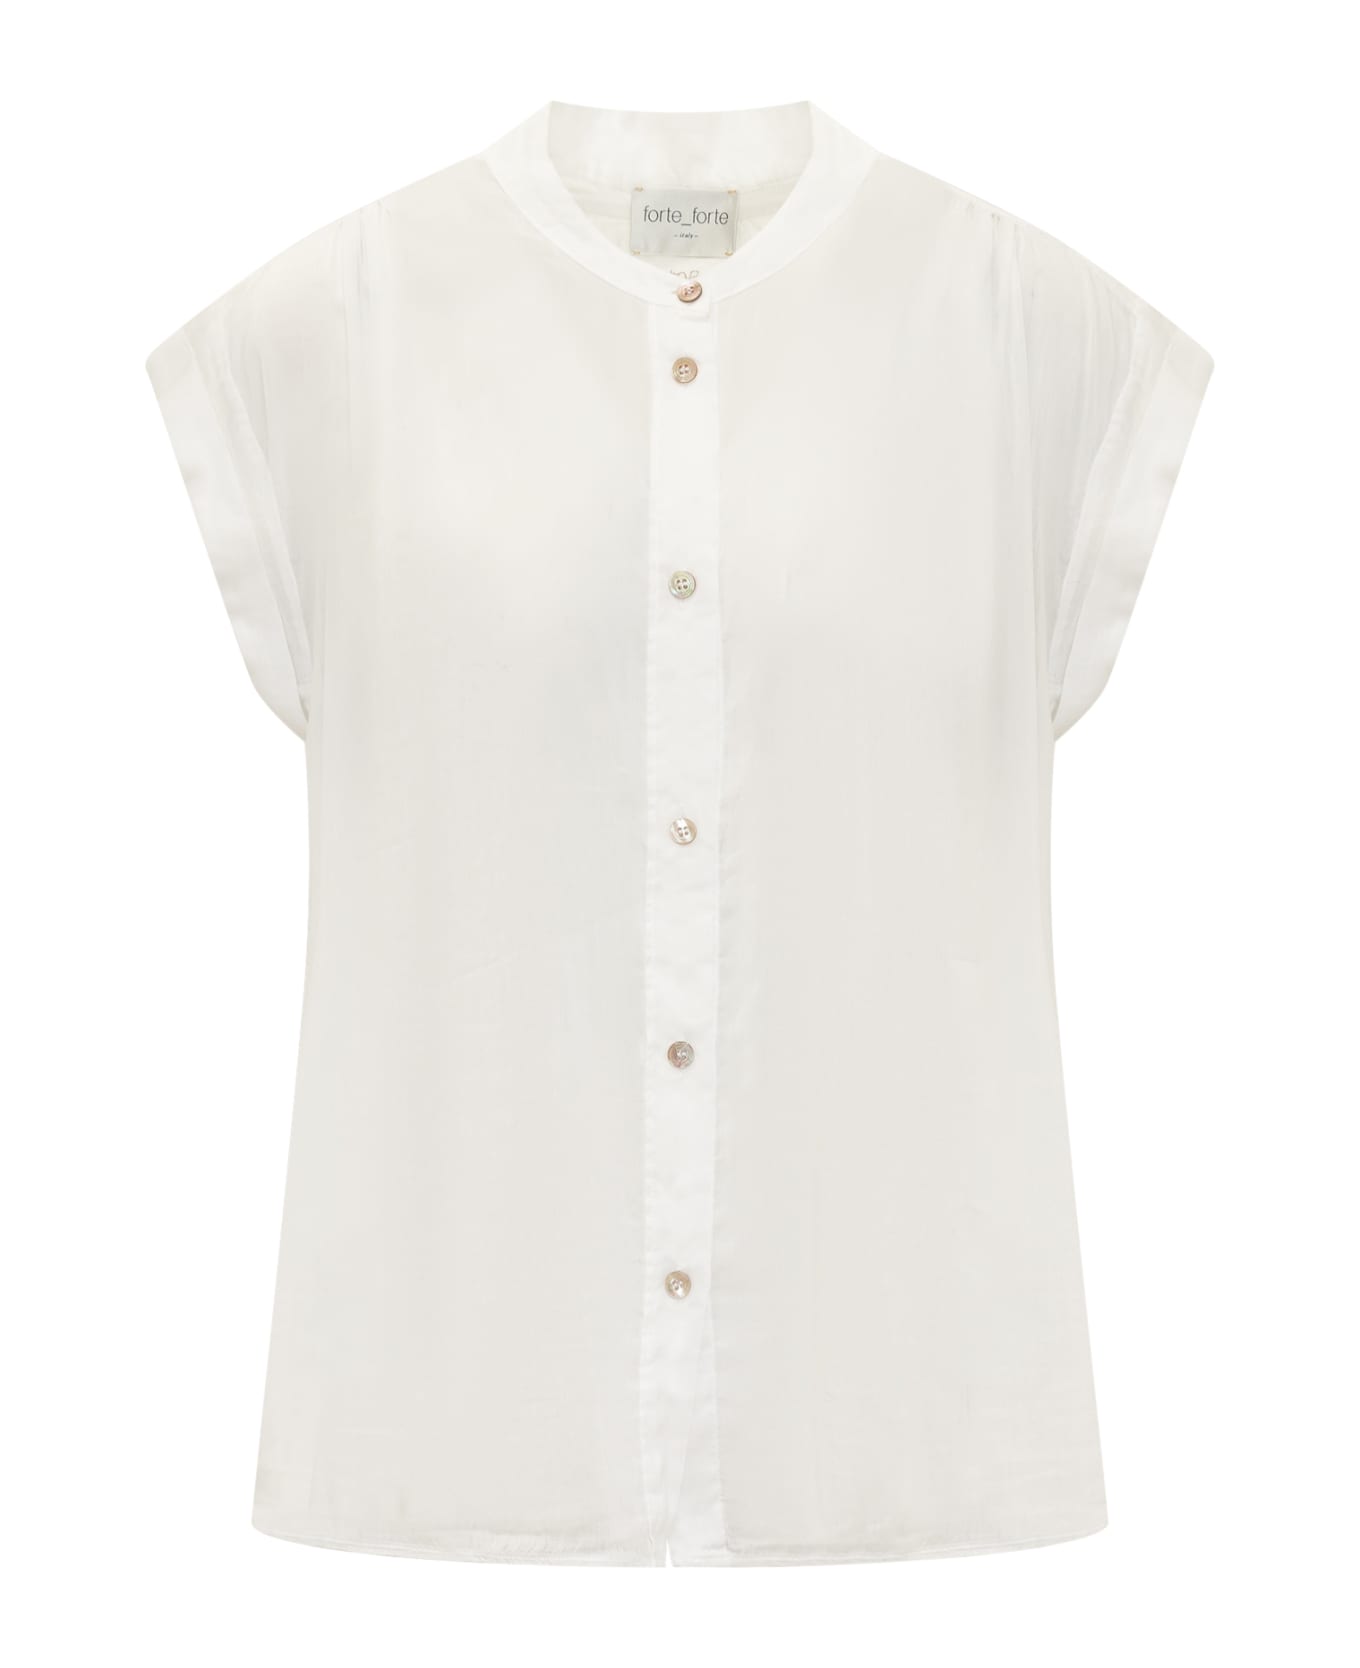 Forte_Forte Top - WHITE トップス